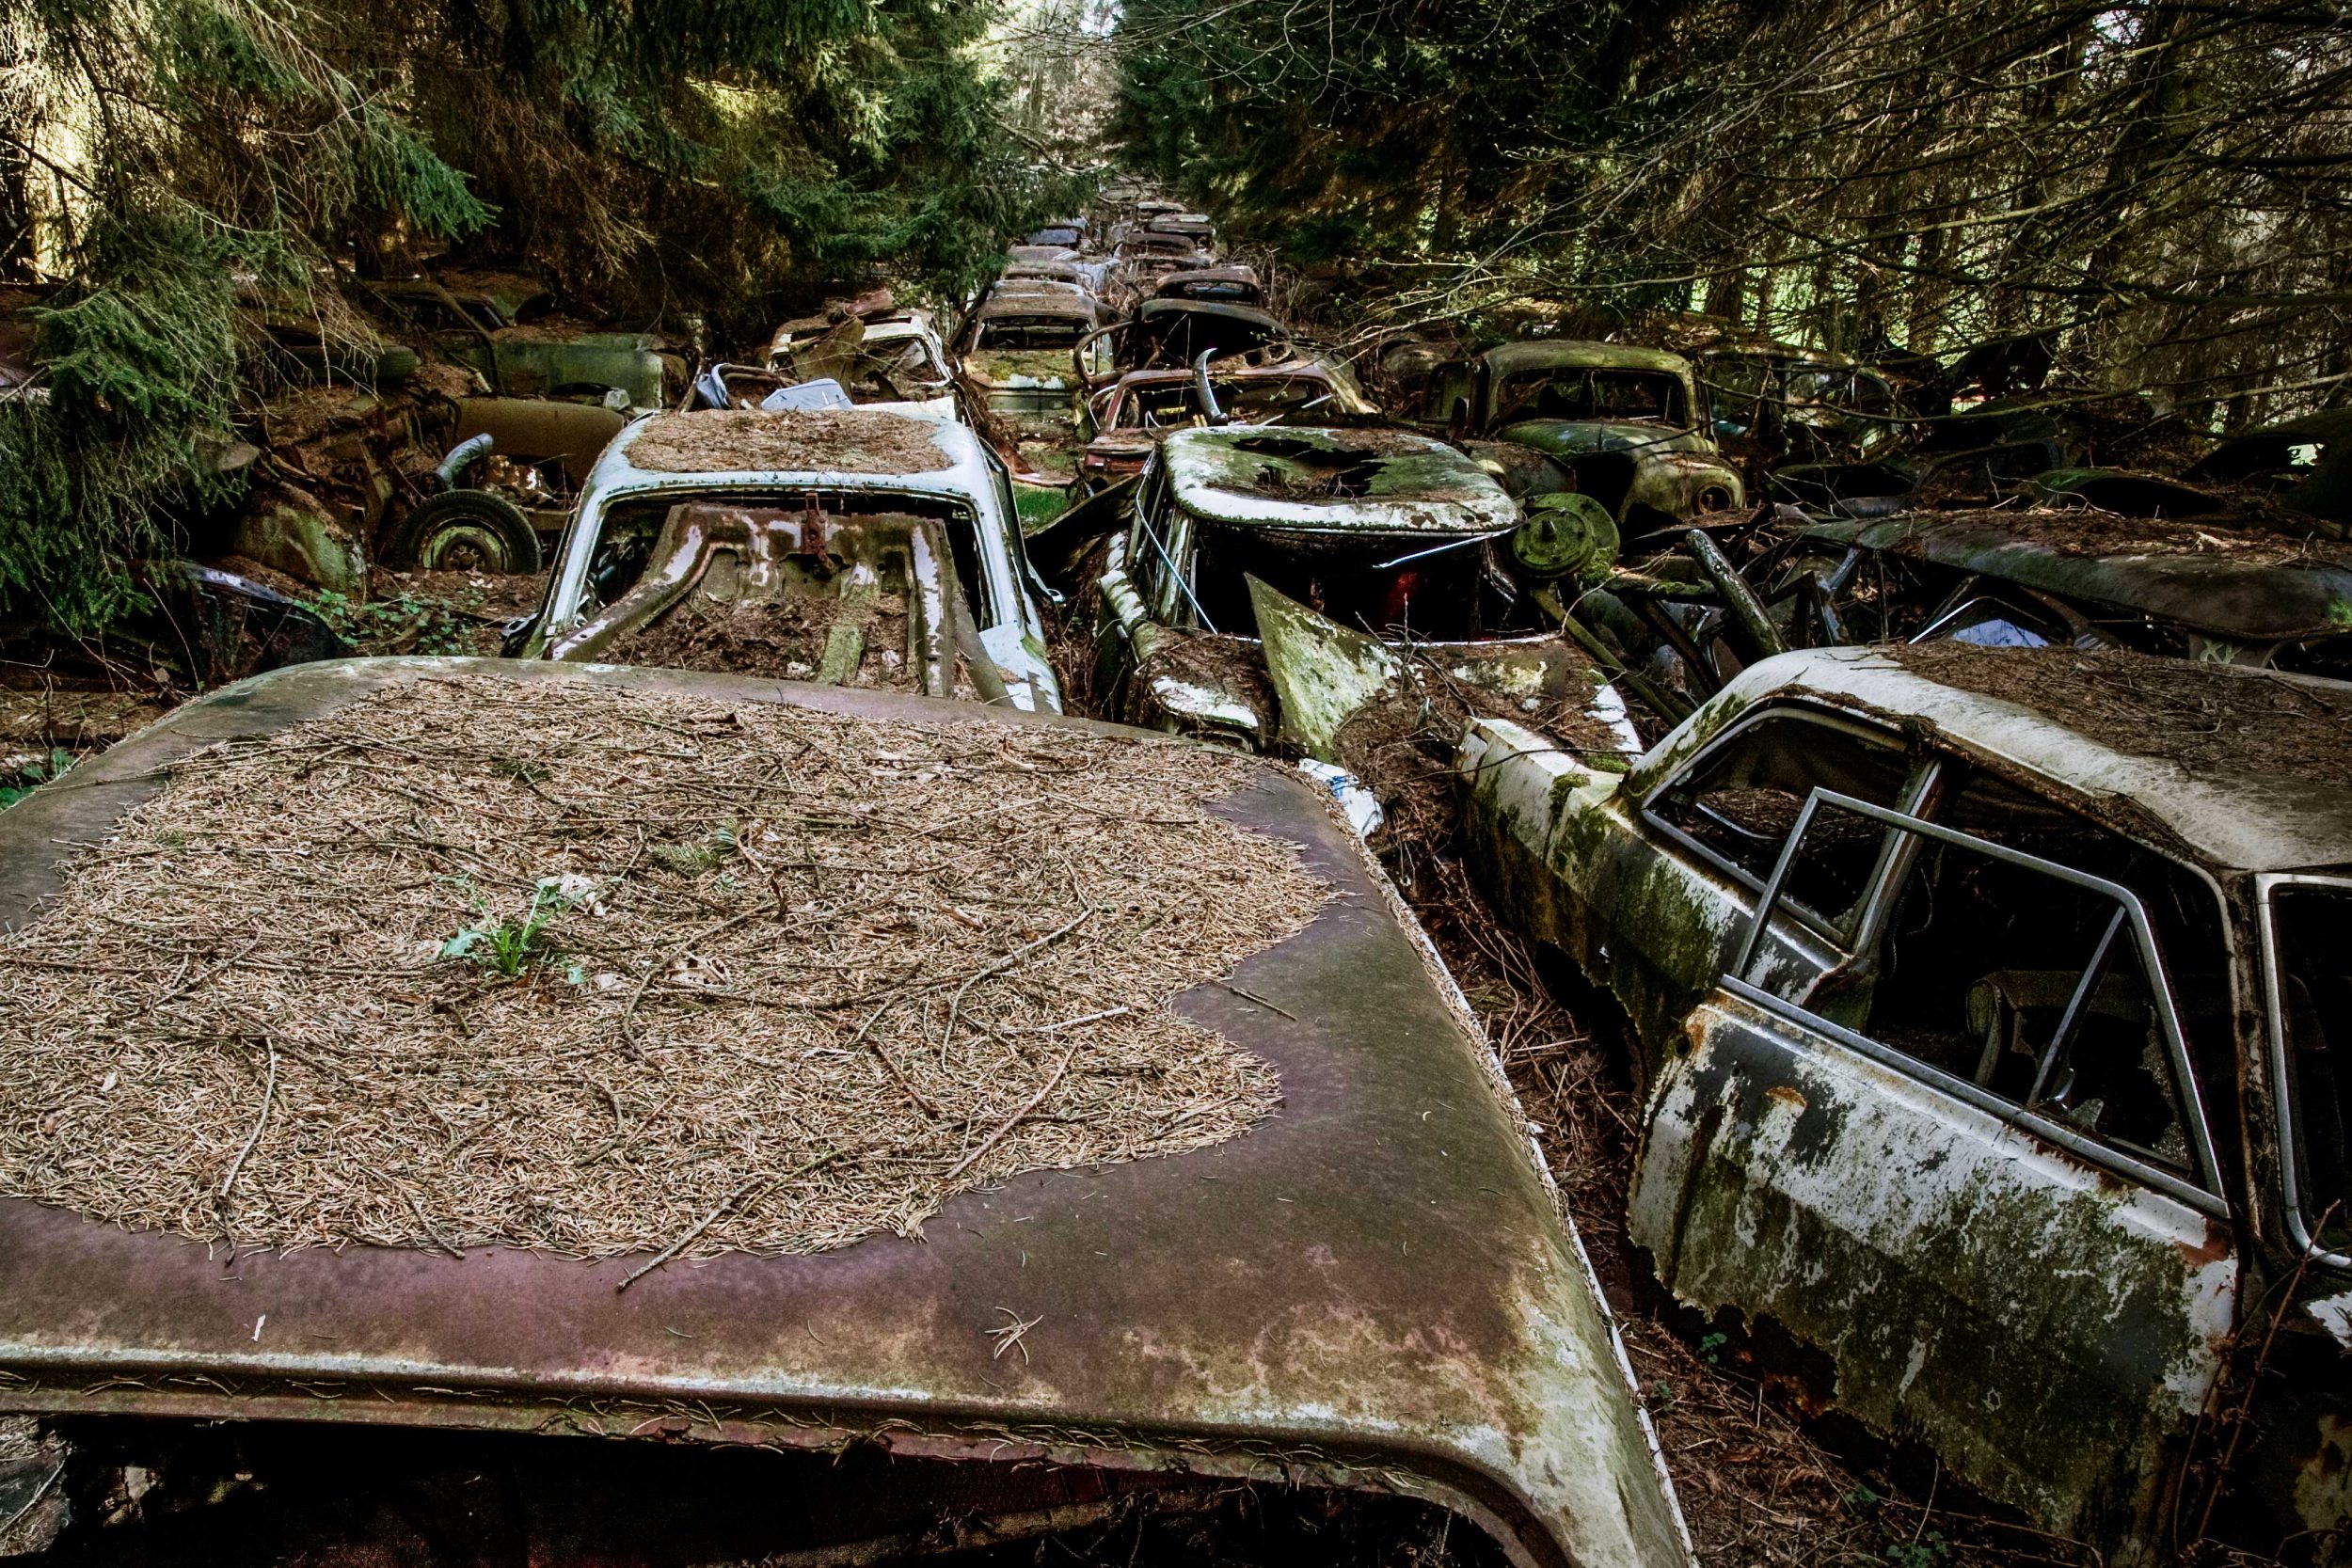 Long rows of derelict cars covered by vegetation in a forest, Chatillon, France